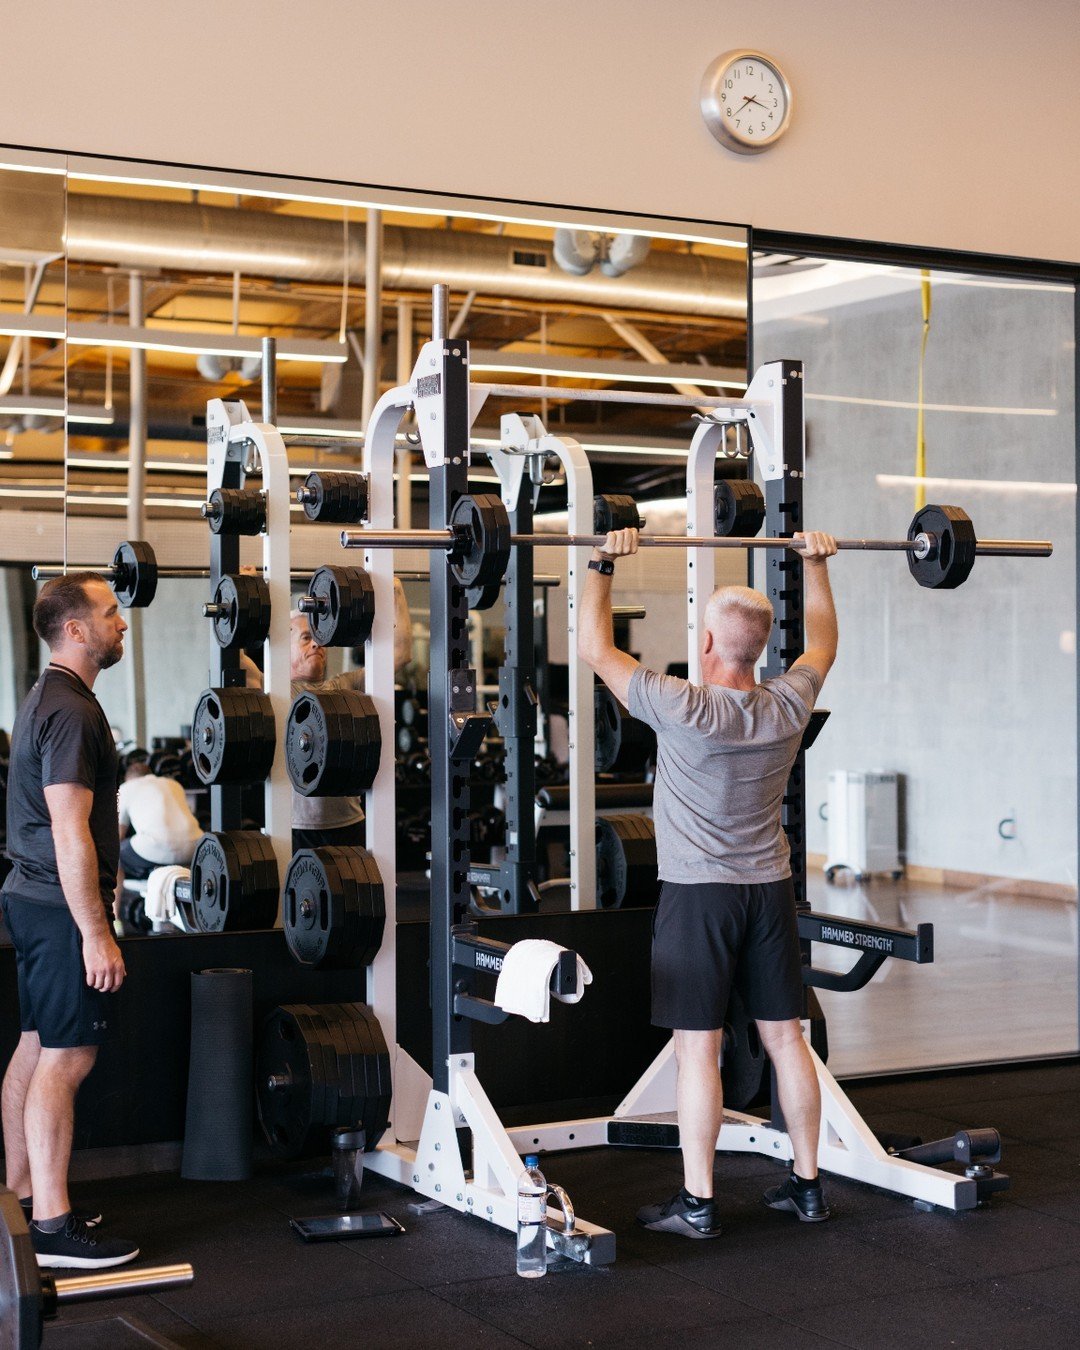 Elevate your fitness journey at Equinox in The Beacon! 

Our state-of-the-art facility offers top-notch equipment, expert trainers, and a supportive community to help you reach your goals. Whether you're into high-intensity workouts, relaxing yoga se